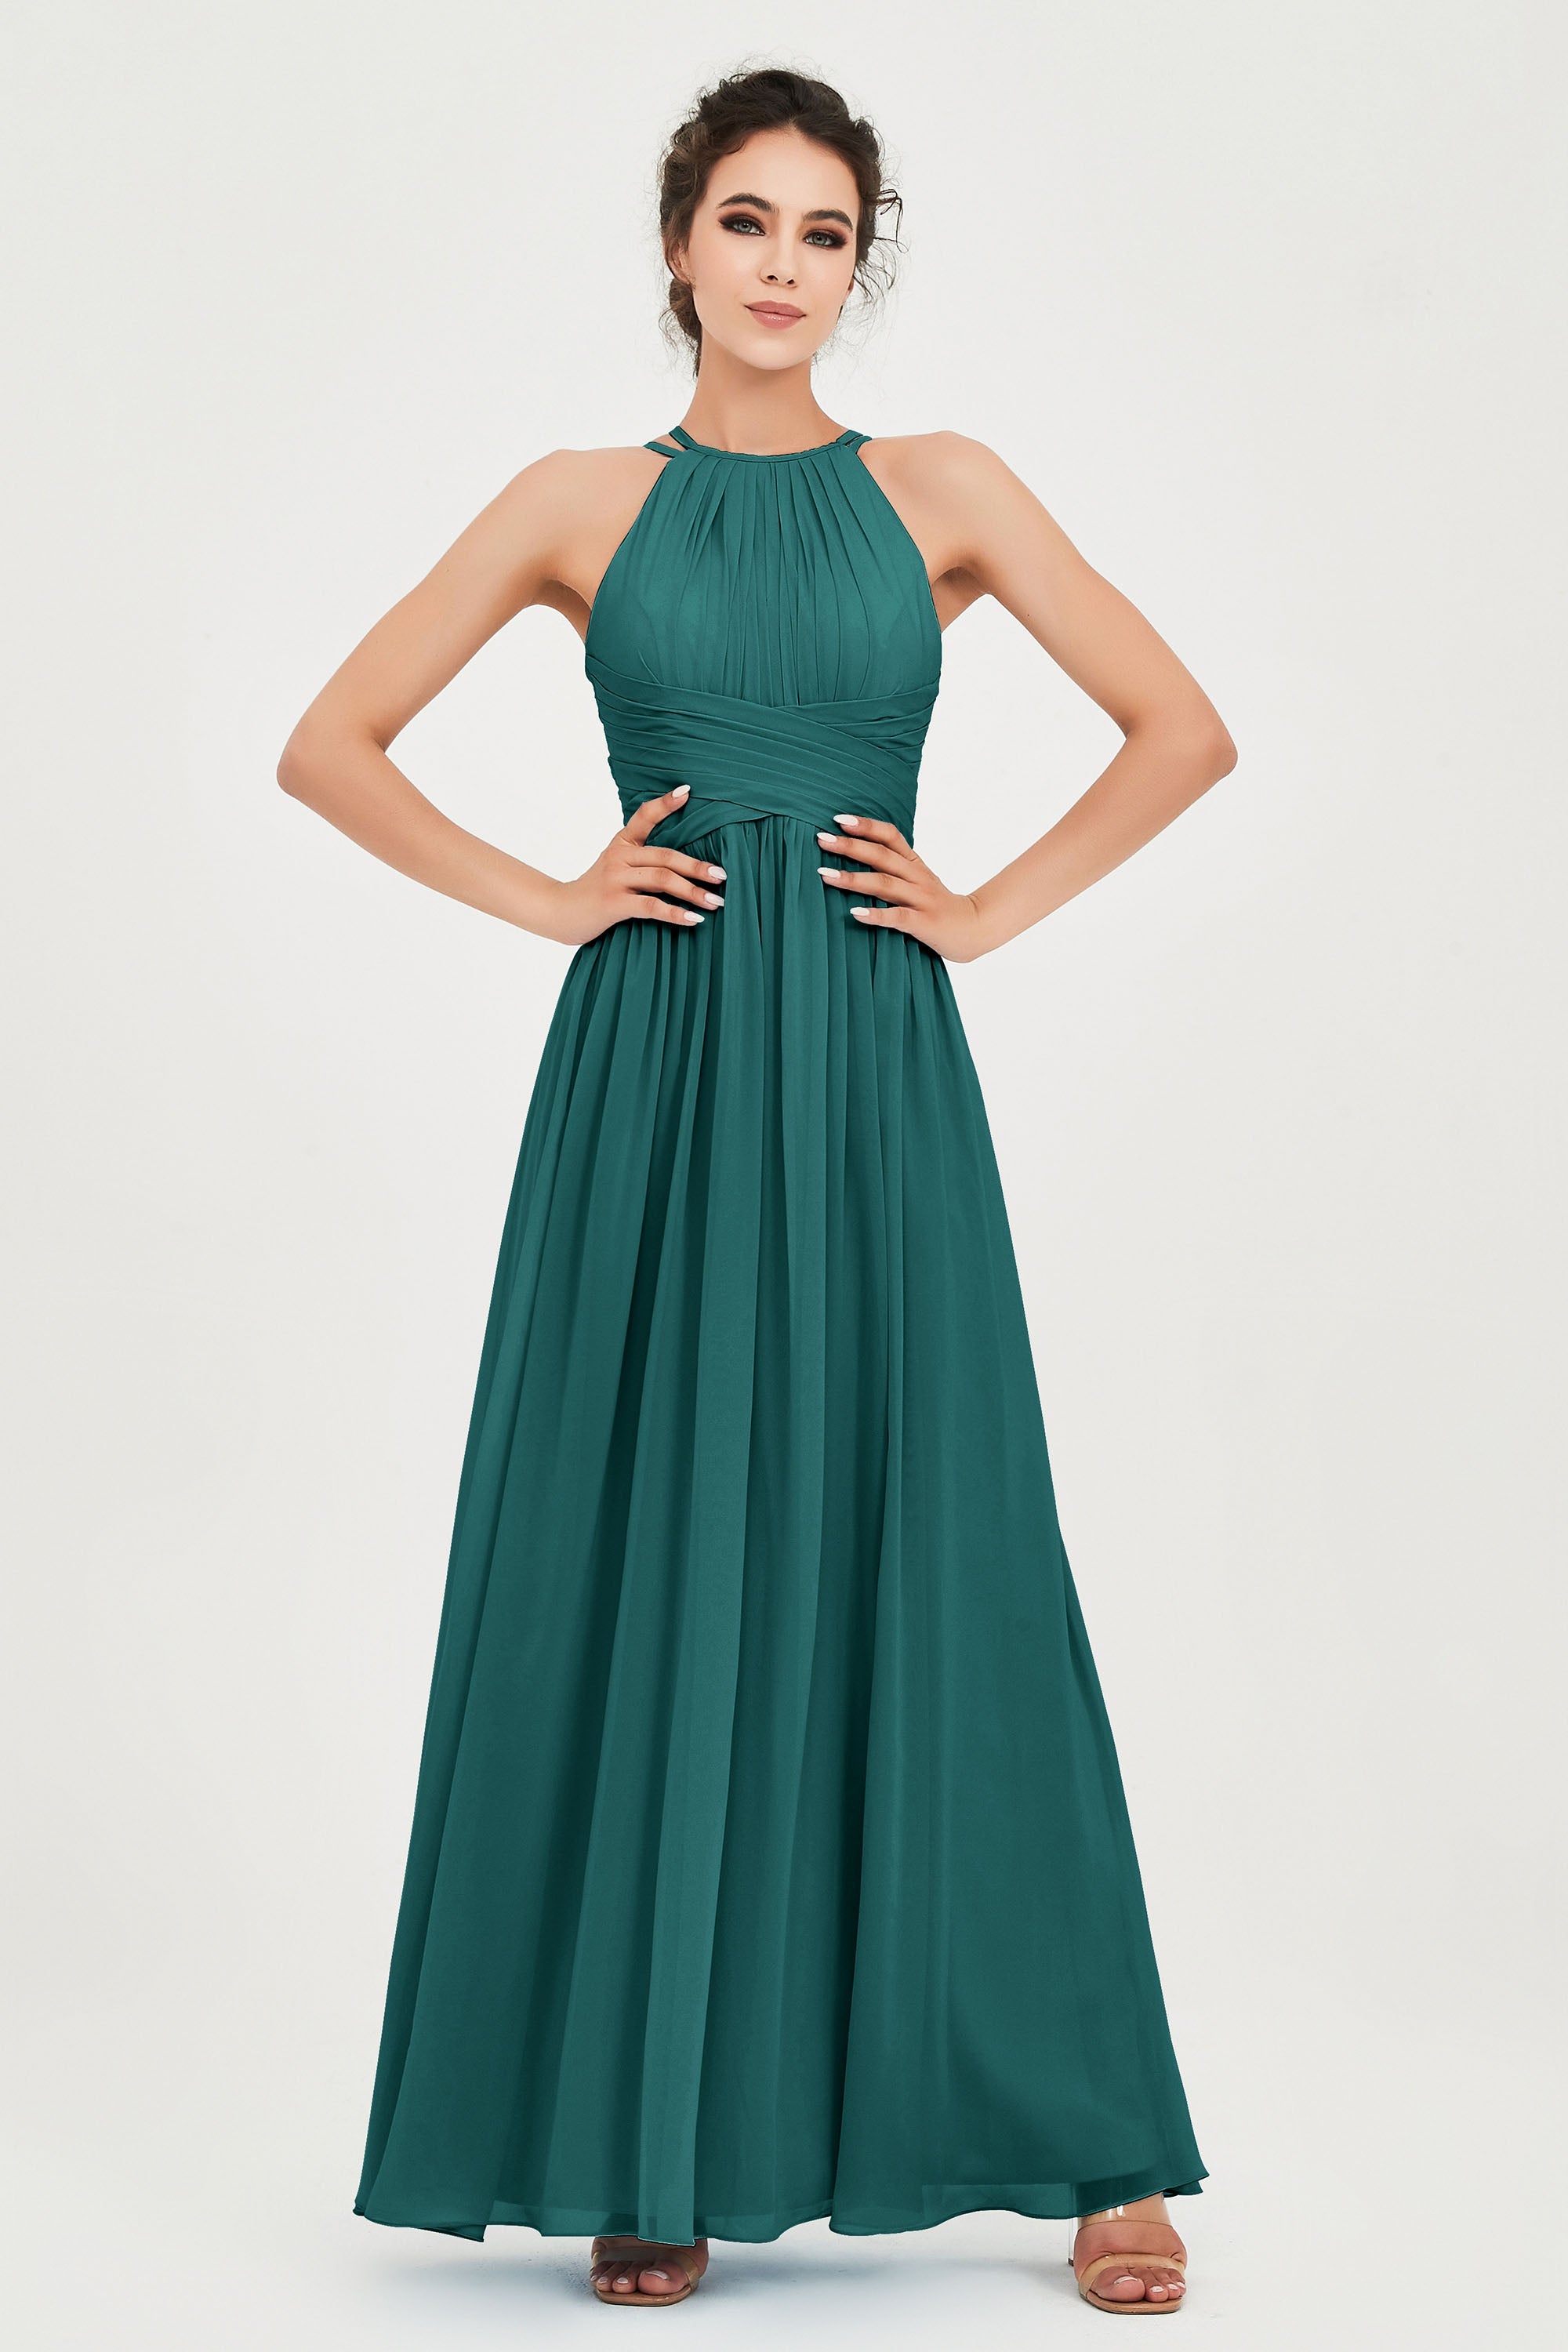 Stunning Long Gown with Embroidered Halter Top Neckline and Flowy Skirt  #CDUJ0120